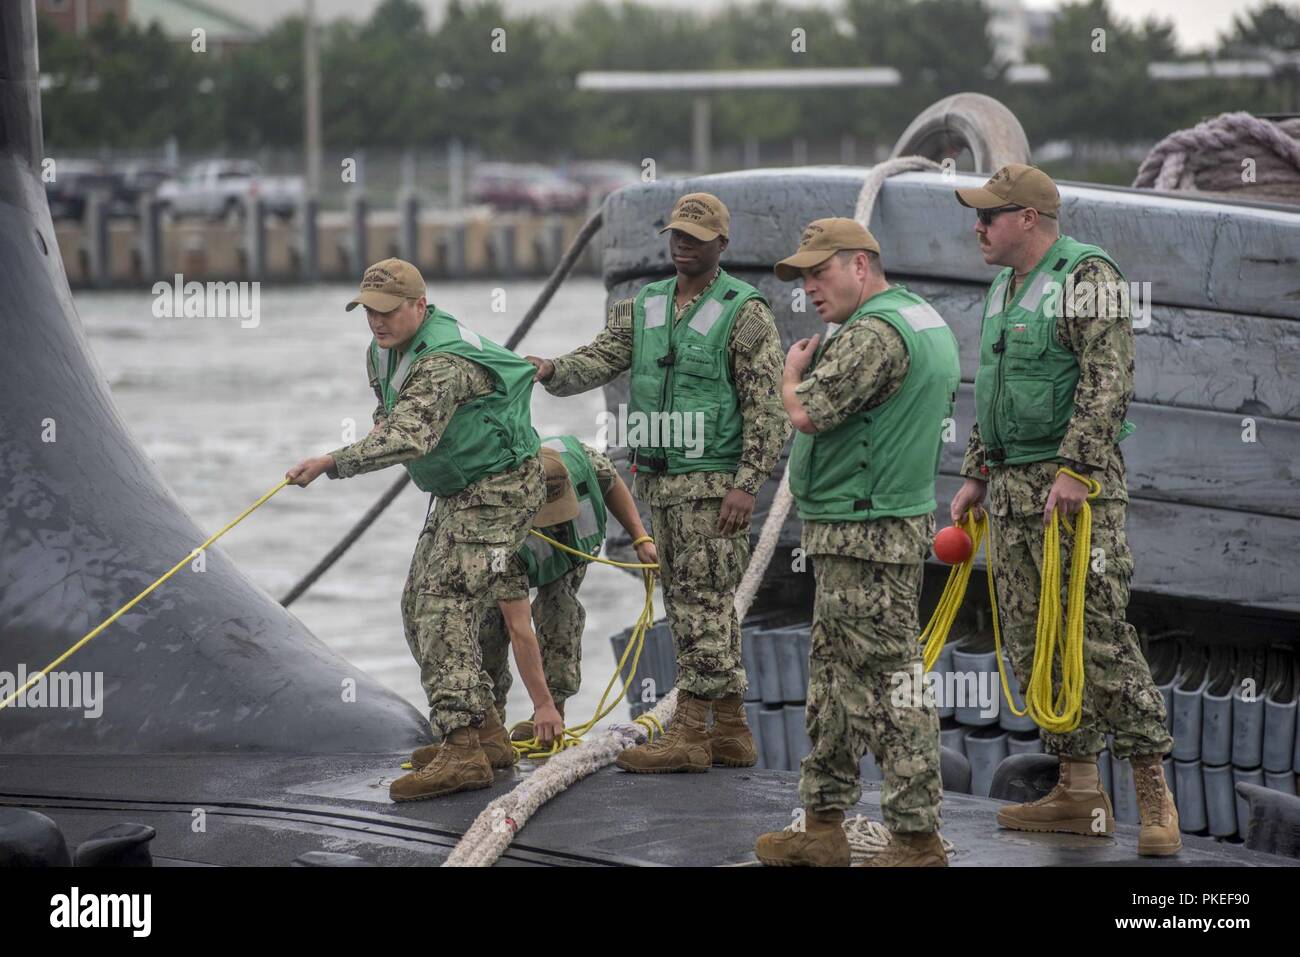 NORFOLK, Va. (July 26, 2018) Sailors aboard the Virginia-class attack submarine USS Washington (SSN 787) perform line handling duties as the ship moors pierside at Naval Station Norfolk. Washington is the Navy's 14th Virginia-class attack submarine and the third commissioned Navy ship named for the State of Washington. Stock Photo